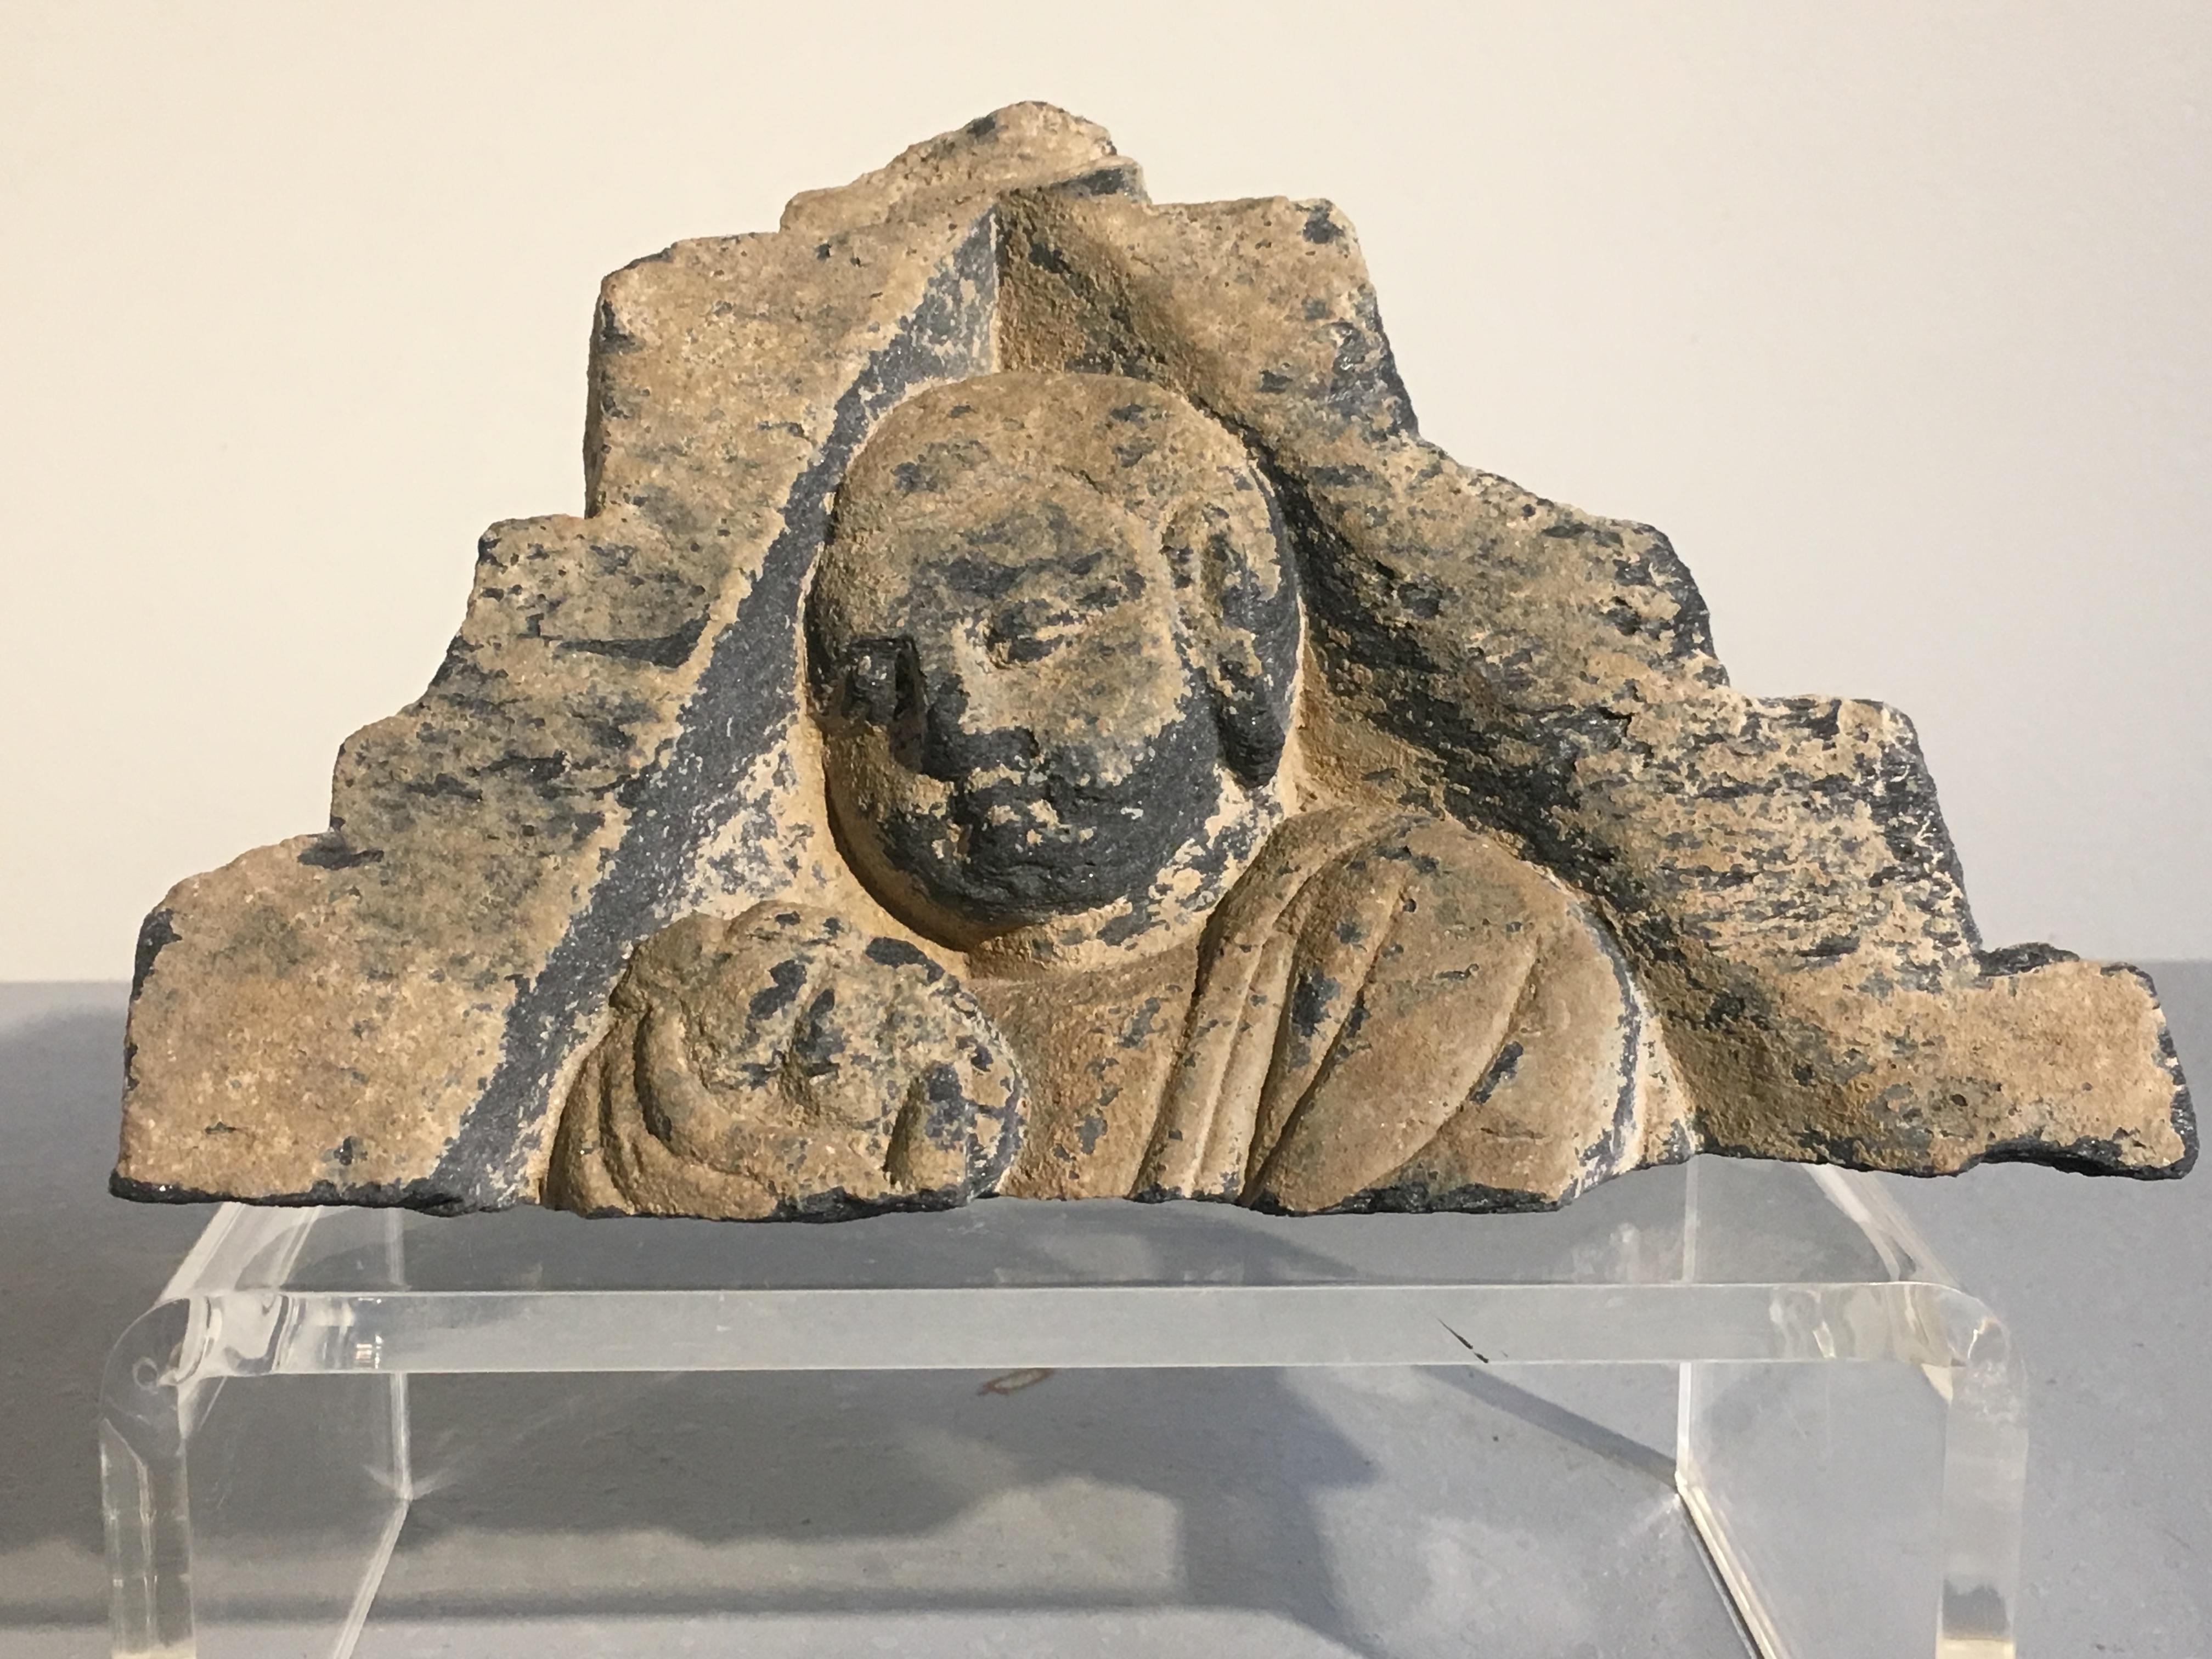 An interesting group of sculptural fragments from the ancient Kingdom of Gandhara, circa 3rd-5th century.
The group consists of a triangular shaped fragment with an image of a monk holding up an offering. This image may represent the final scene in